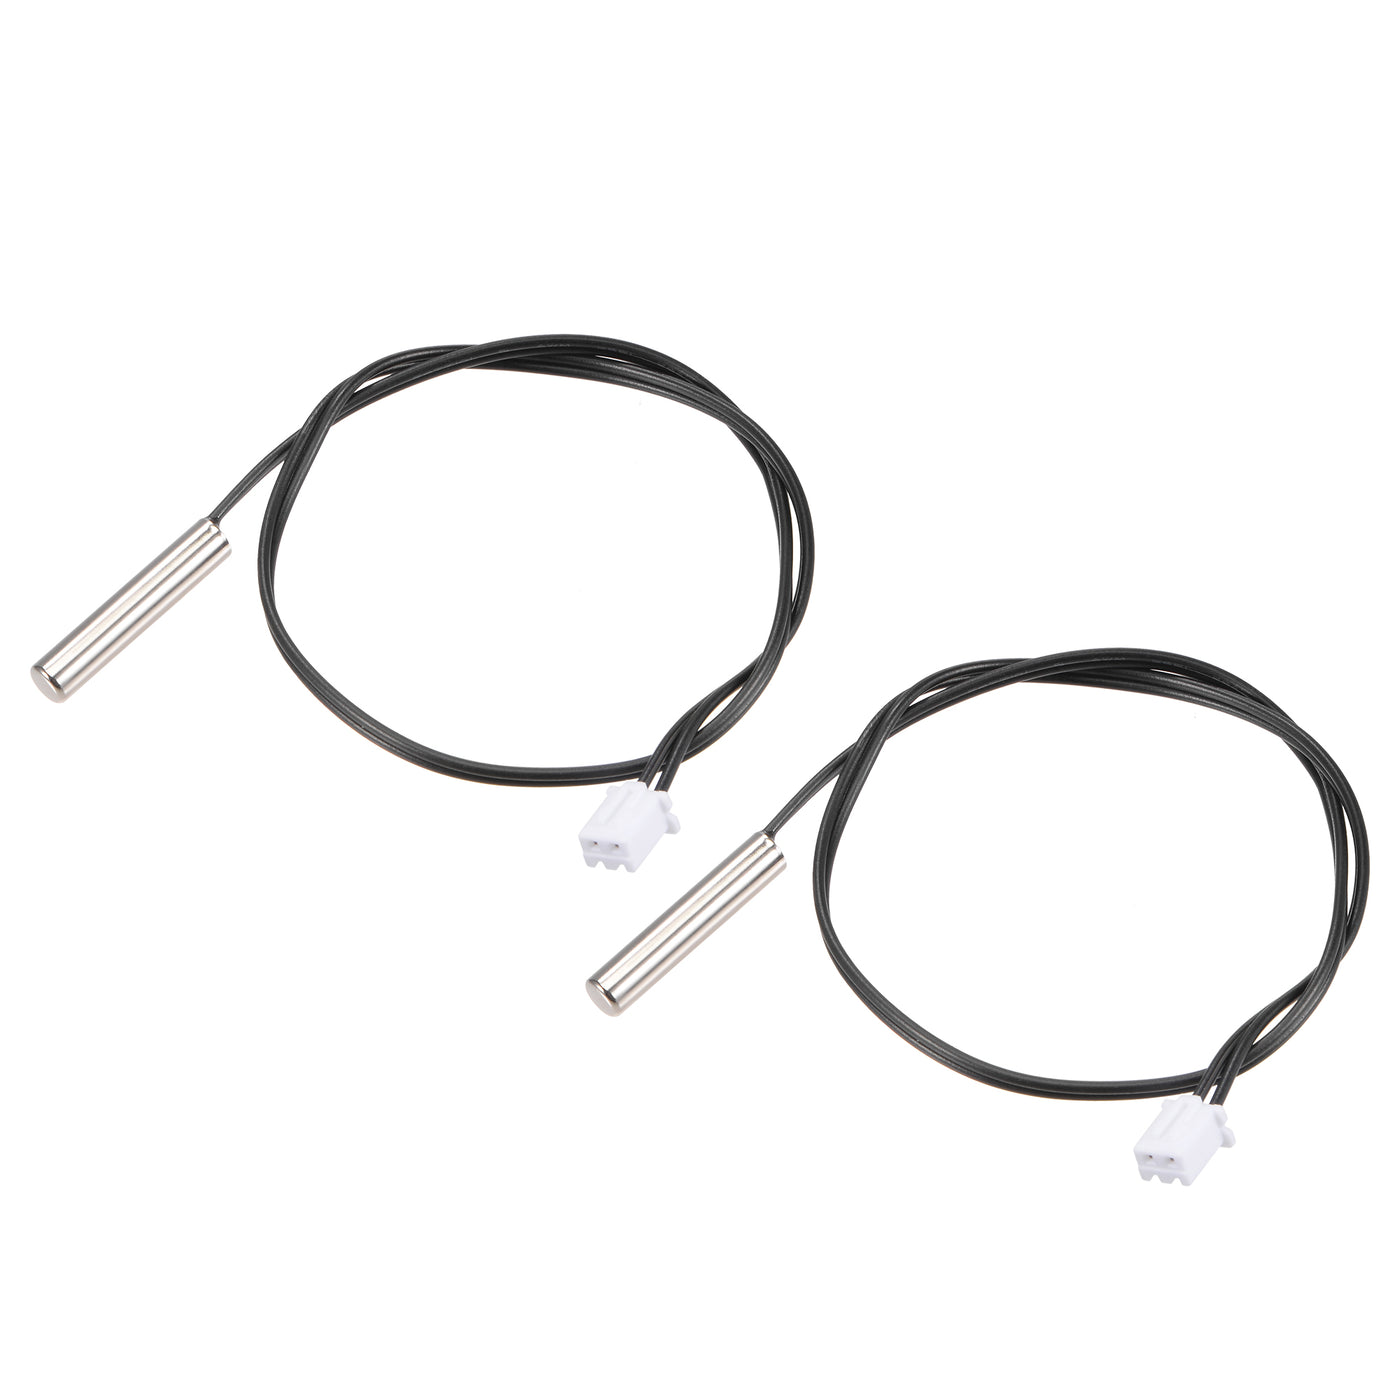 uxcell Uxcell 2pcs 10K Temperature Sensor Probe, Stainless Steel NTC Thermal Sensor Probe 30cm Digital Thermometer Extension Cable